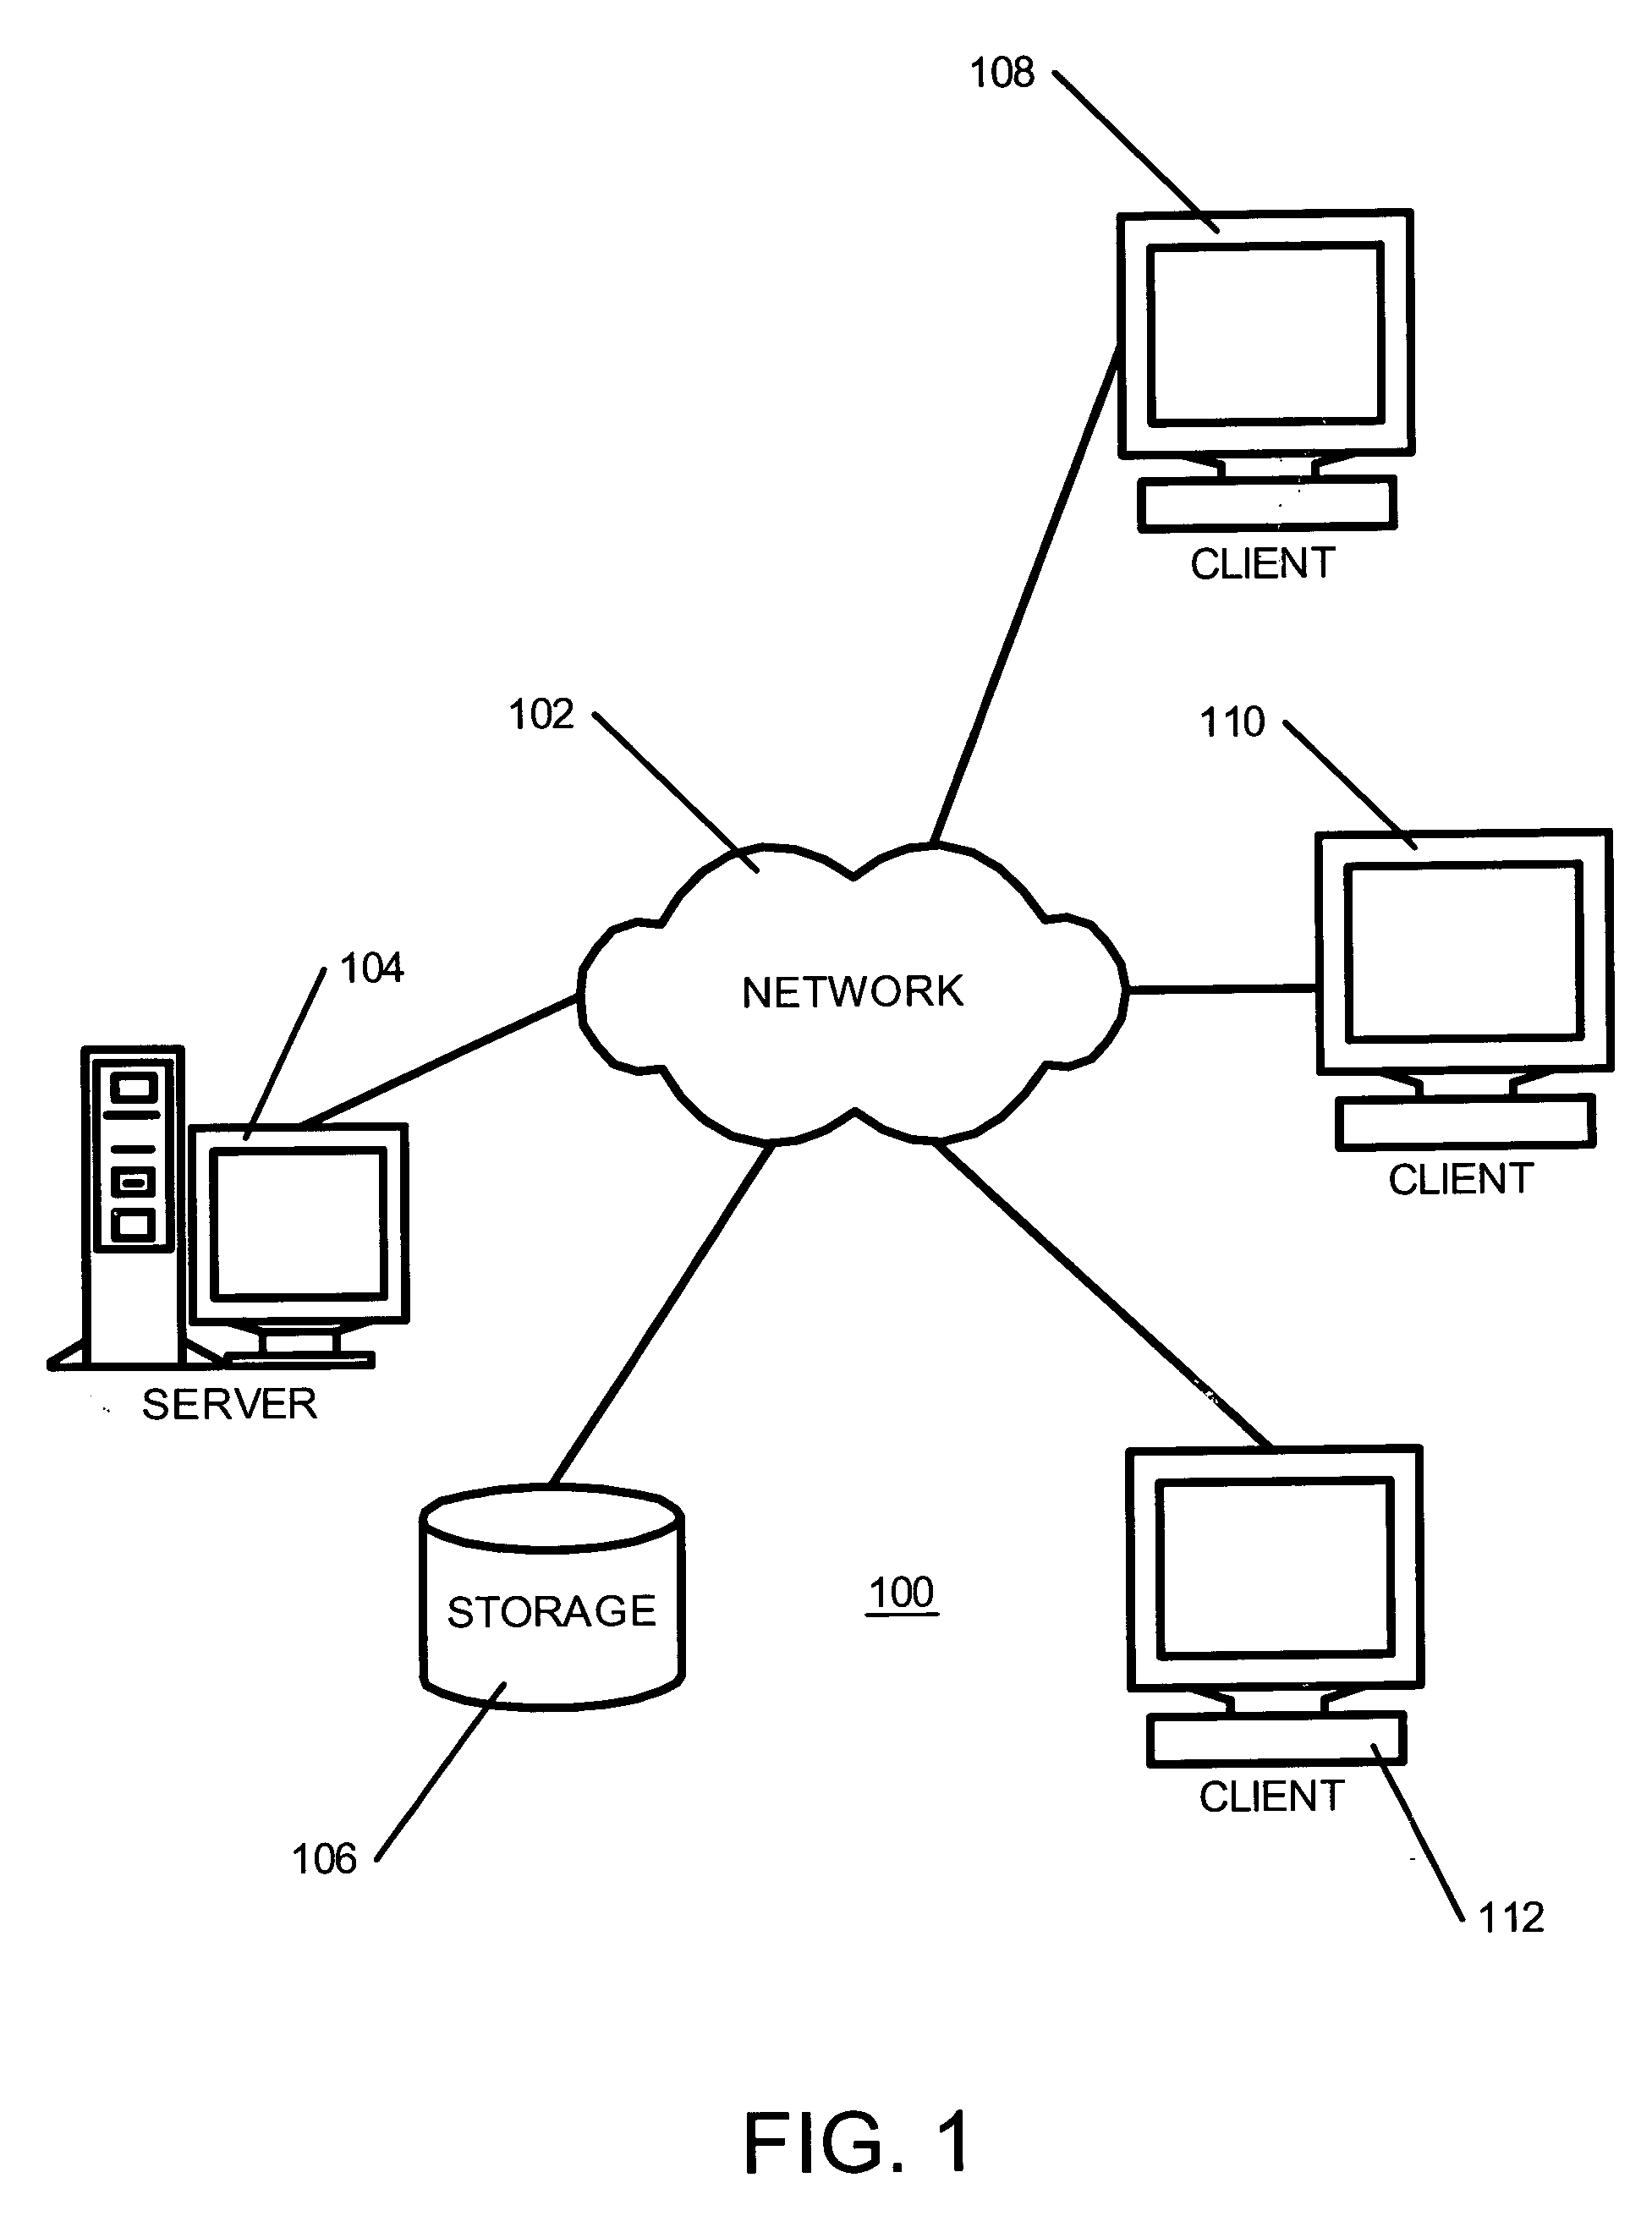 System and method of facilitating an icon selection among a plurality of icons on a desktop